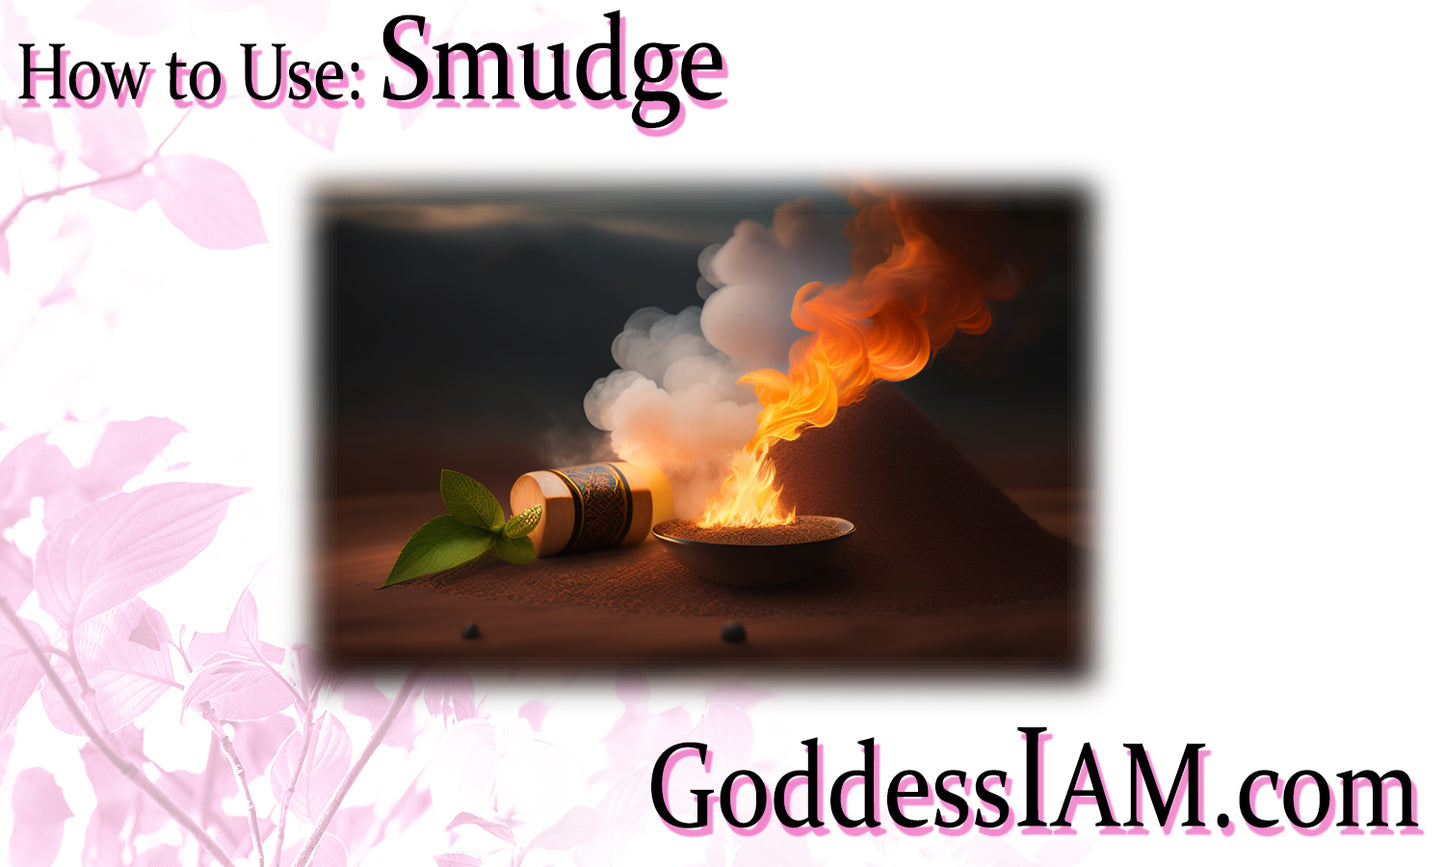 How to Use: Smudge